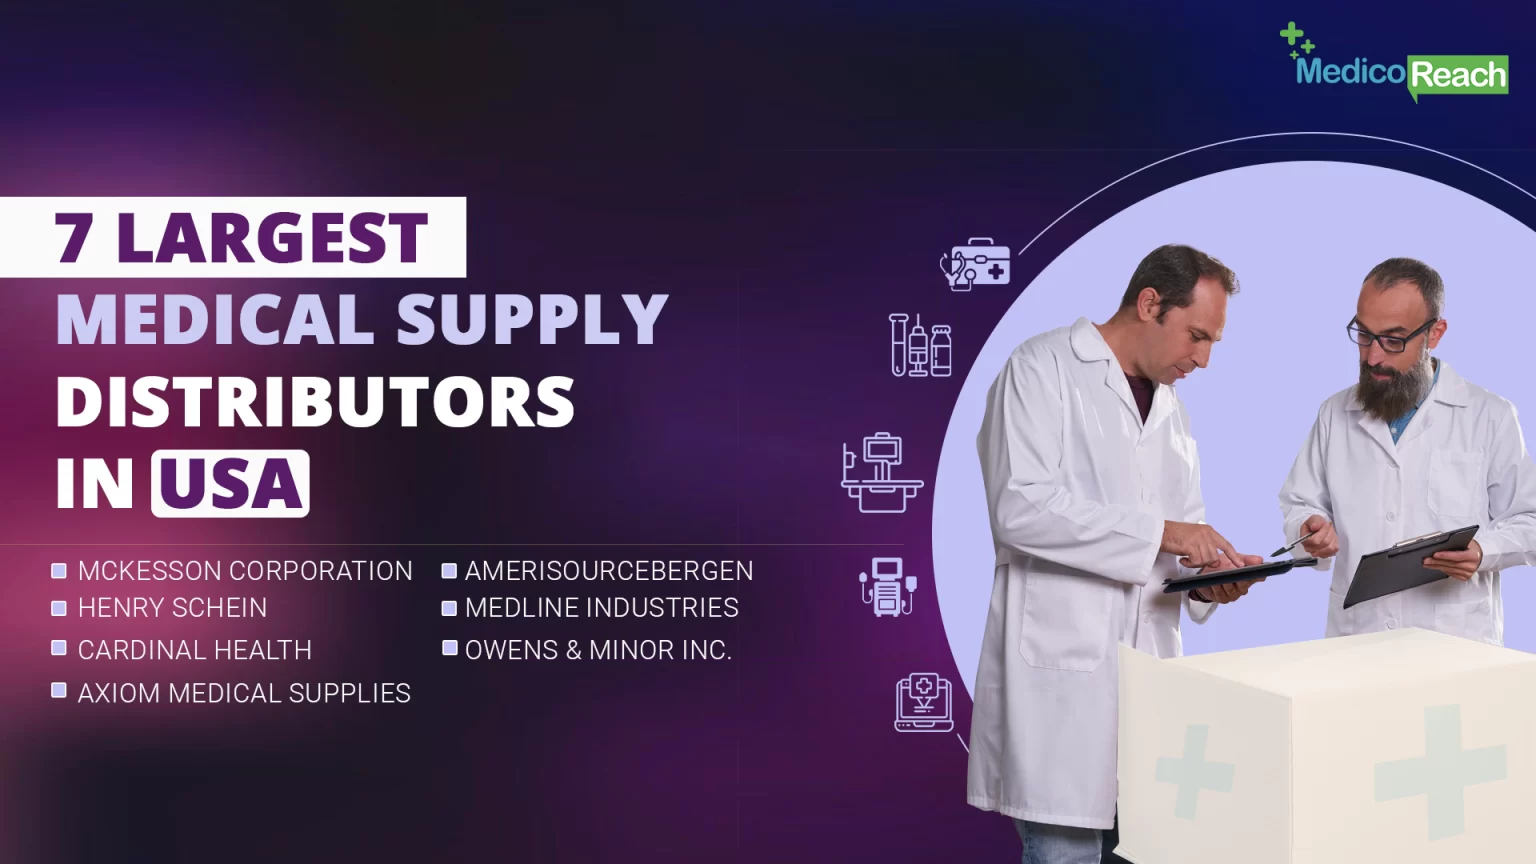 7 Largest Medical Supply Distributors in USA